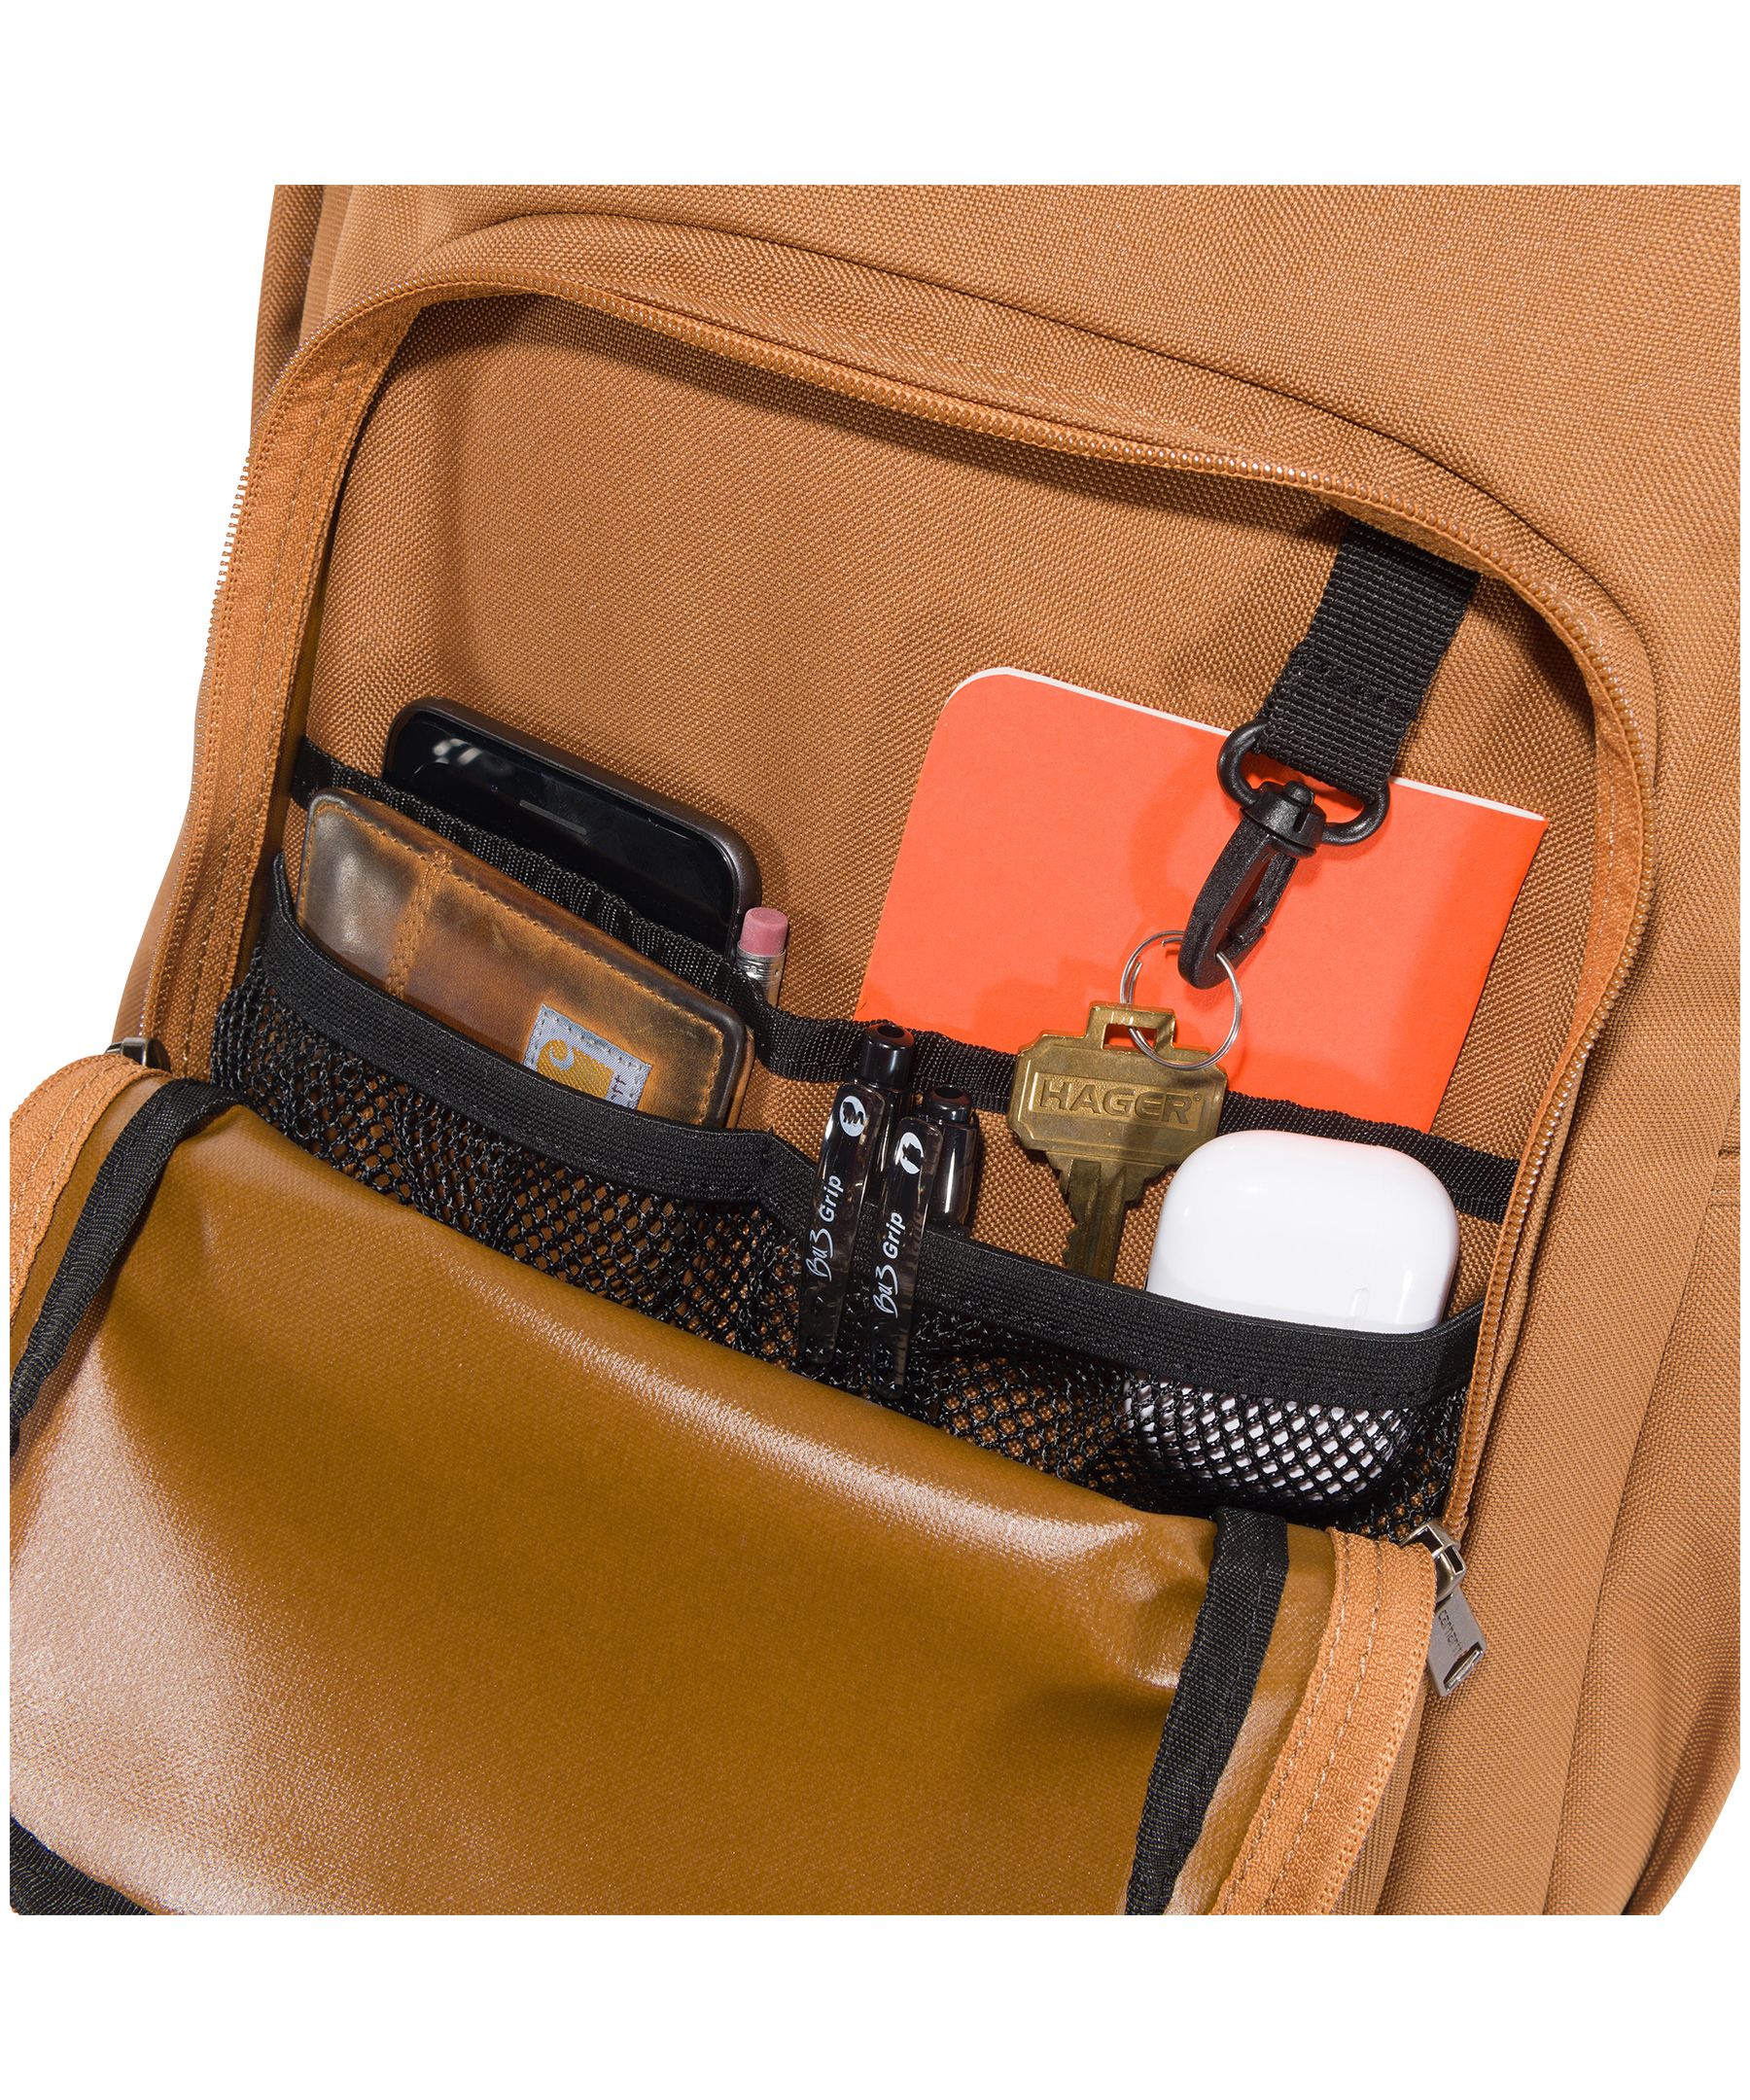 Carhartt Classic Backpack with Laptop Compartment